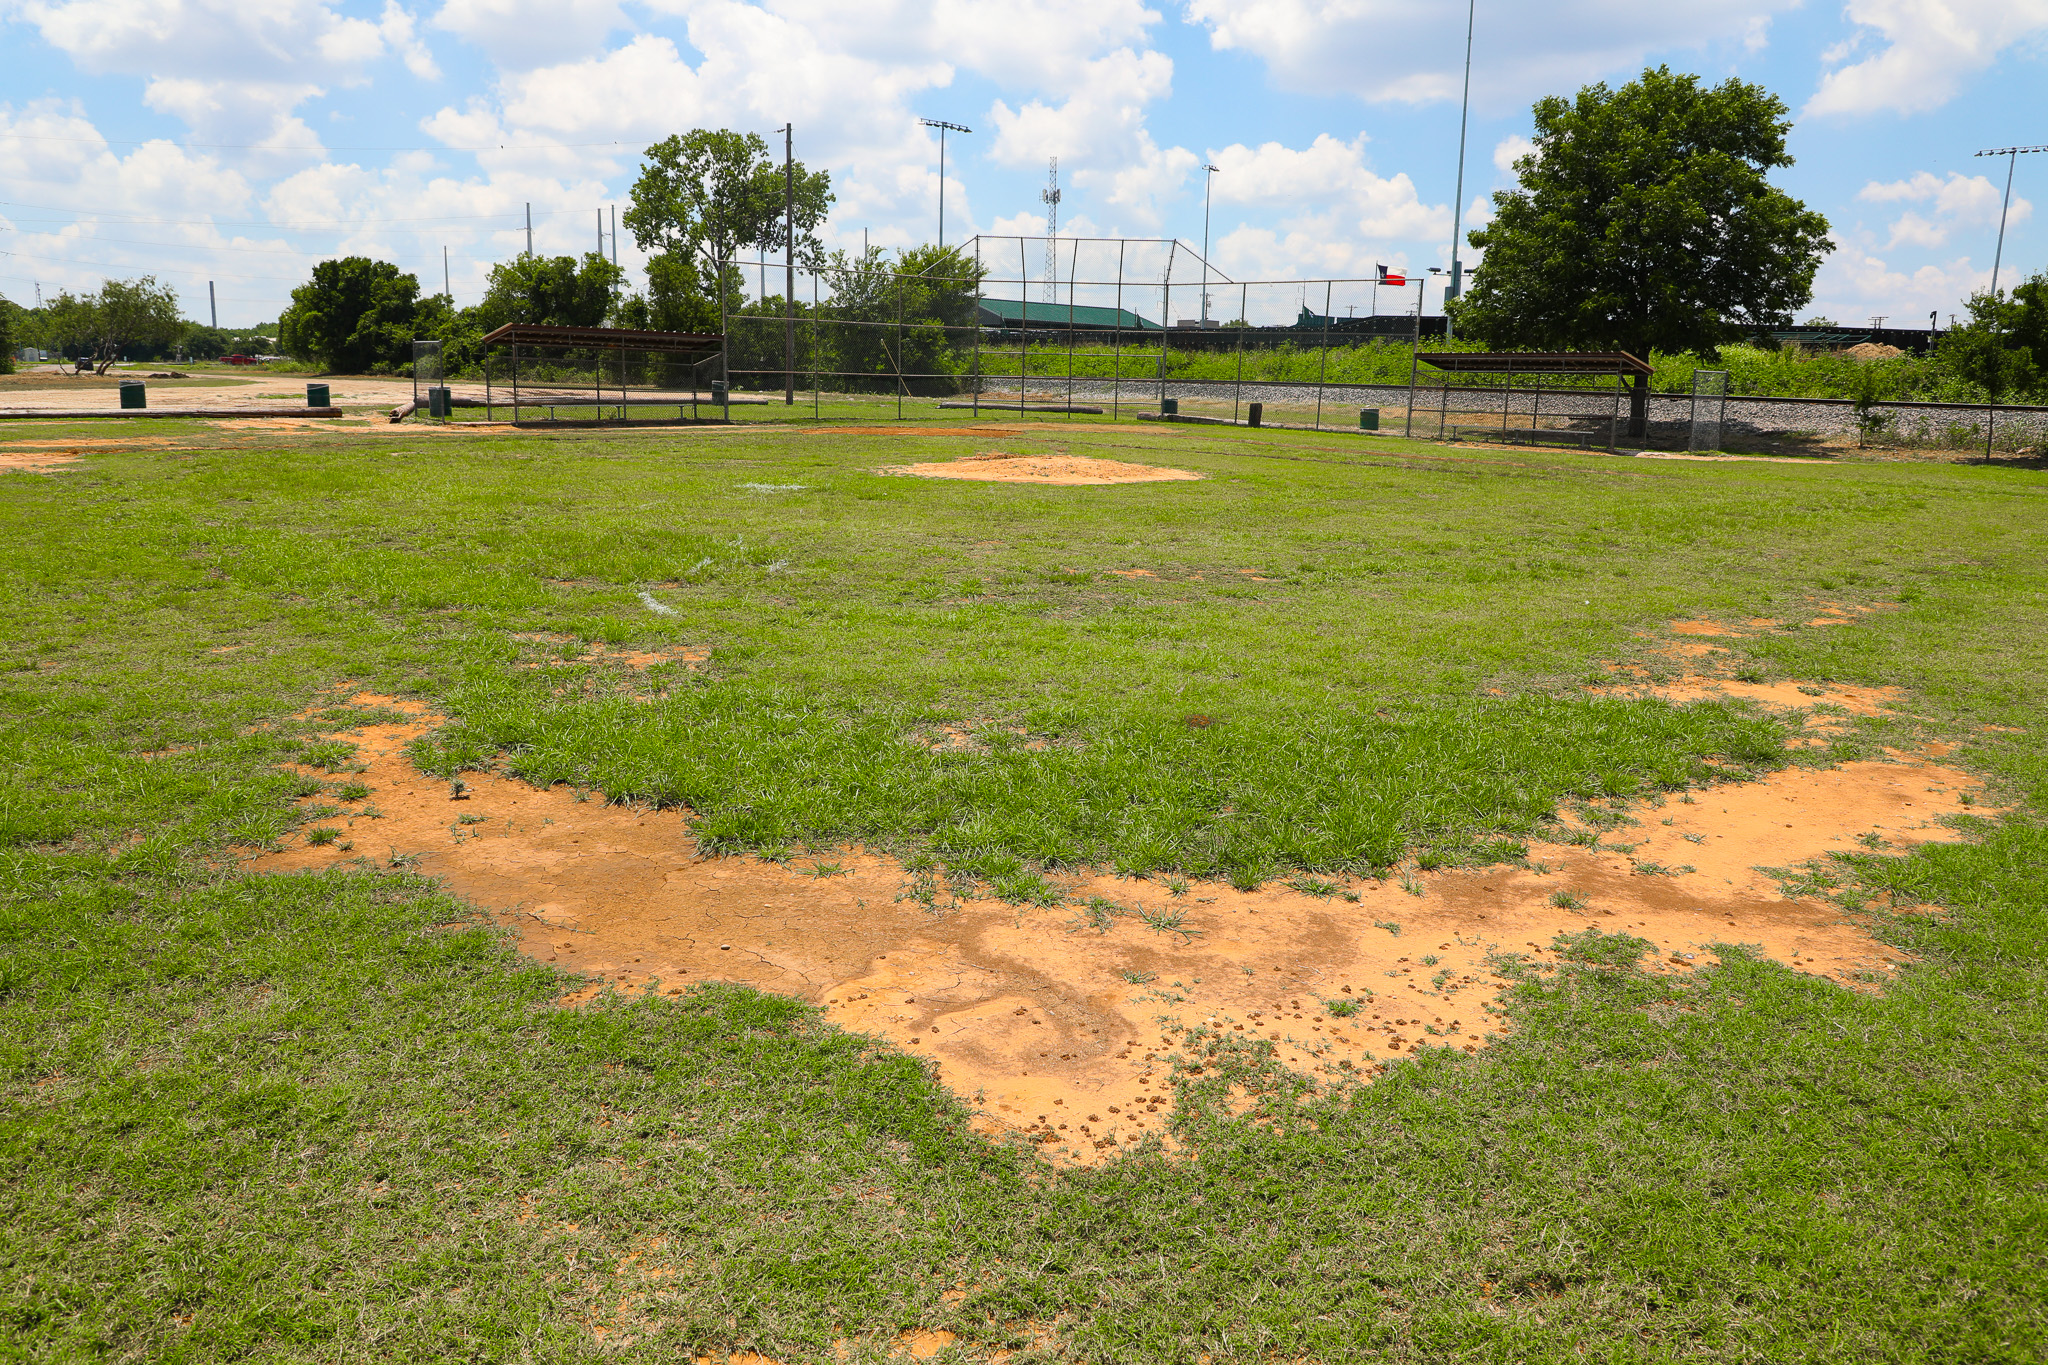 To kickoff its Park and Rec Makeover Content, Bobcat renovated a park in Waco, Texas. Photo by Jenn Ackerman